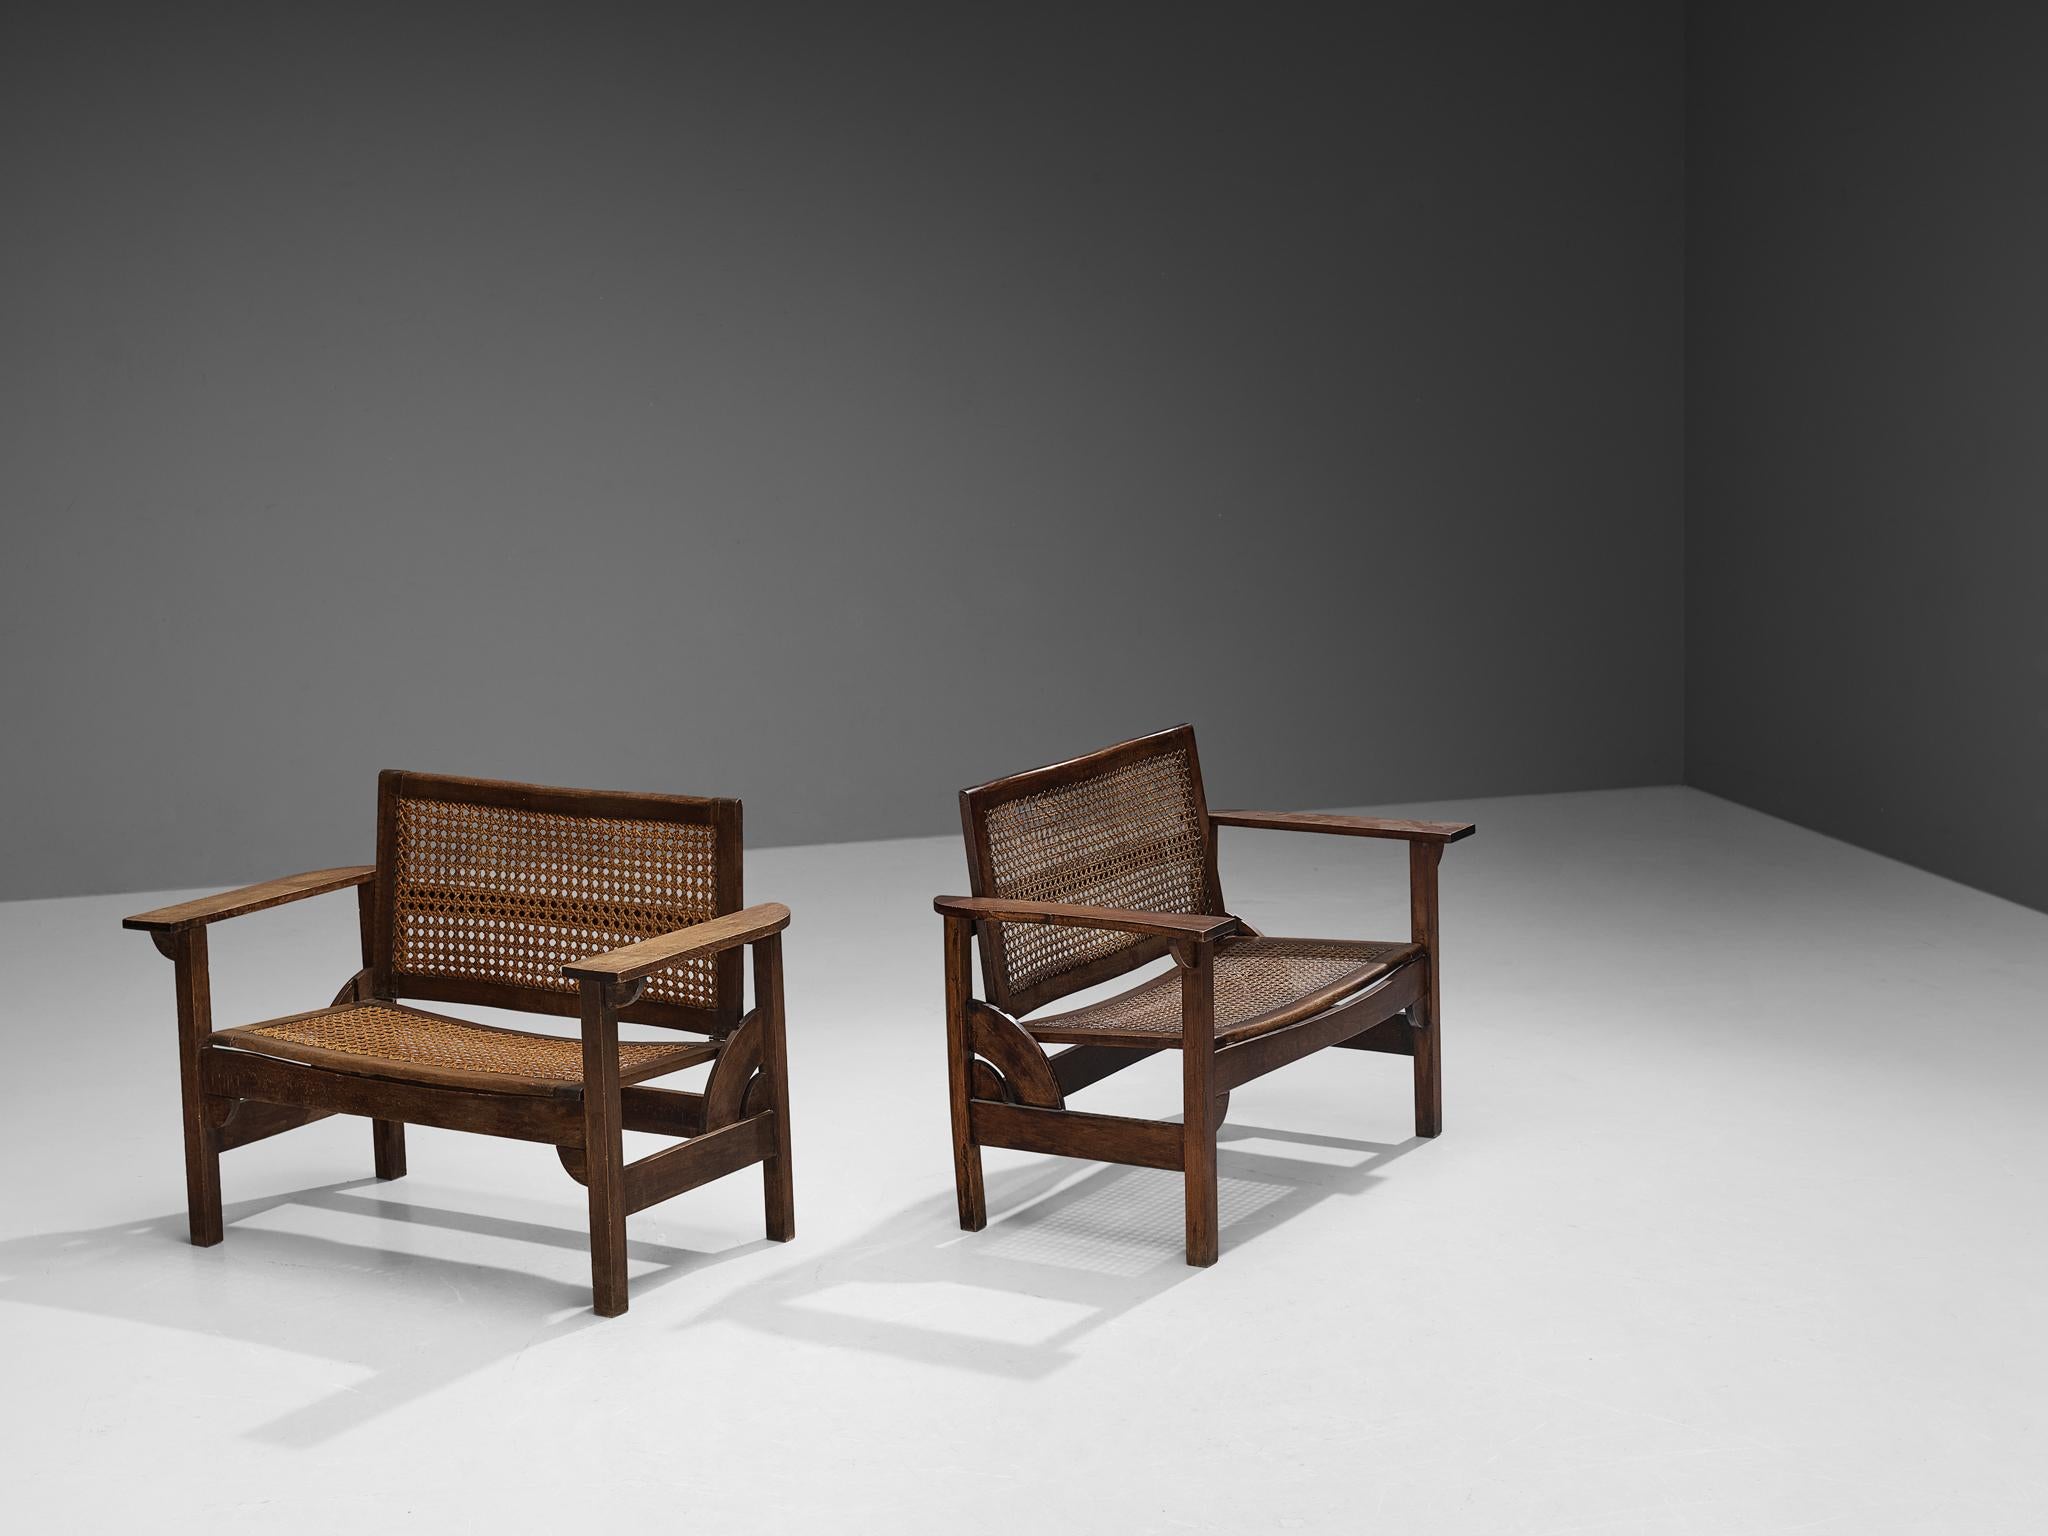 Pierre Dariel, settees model 'Hendaye', oak, beech, cane, France, 1930s.

Sturdy 'Hendaye' model bench designed by Pierre Dariel in the 1930s. The structure is composed entirely out of oak and beech, while the seat and backrest are made of cane.